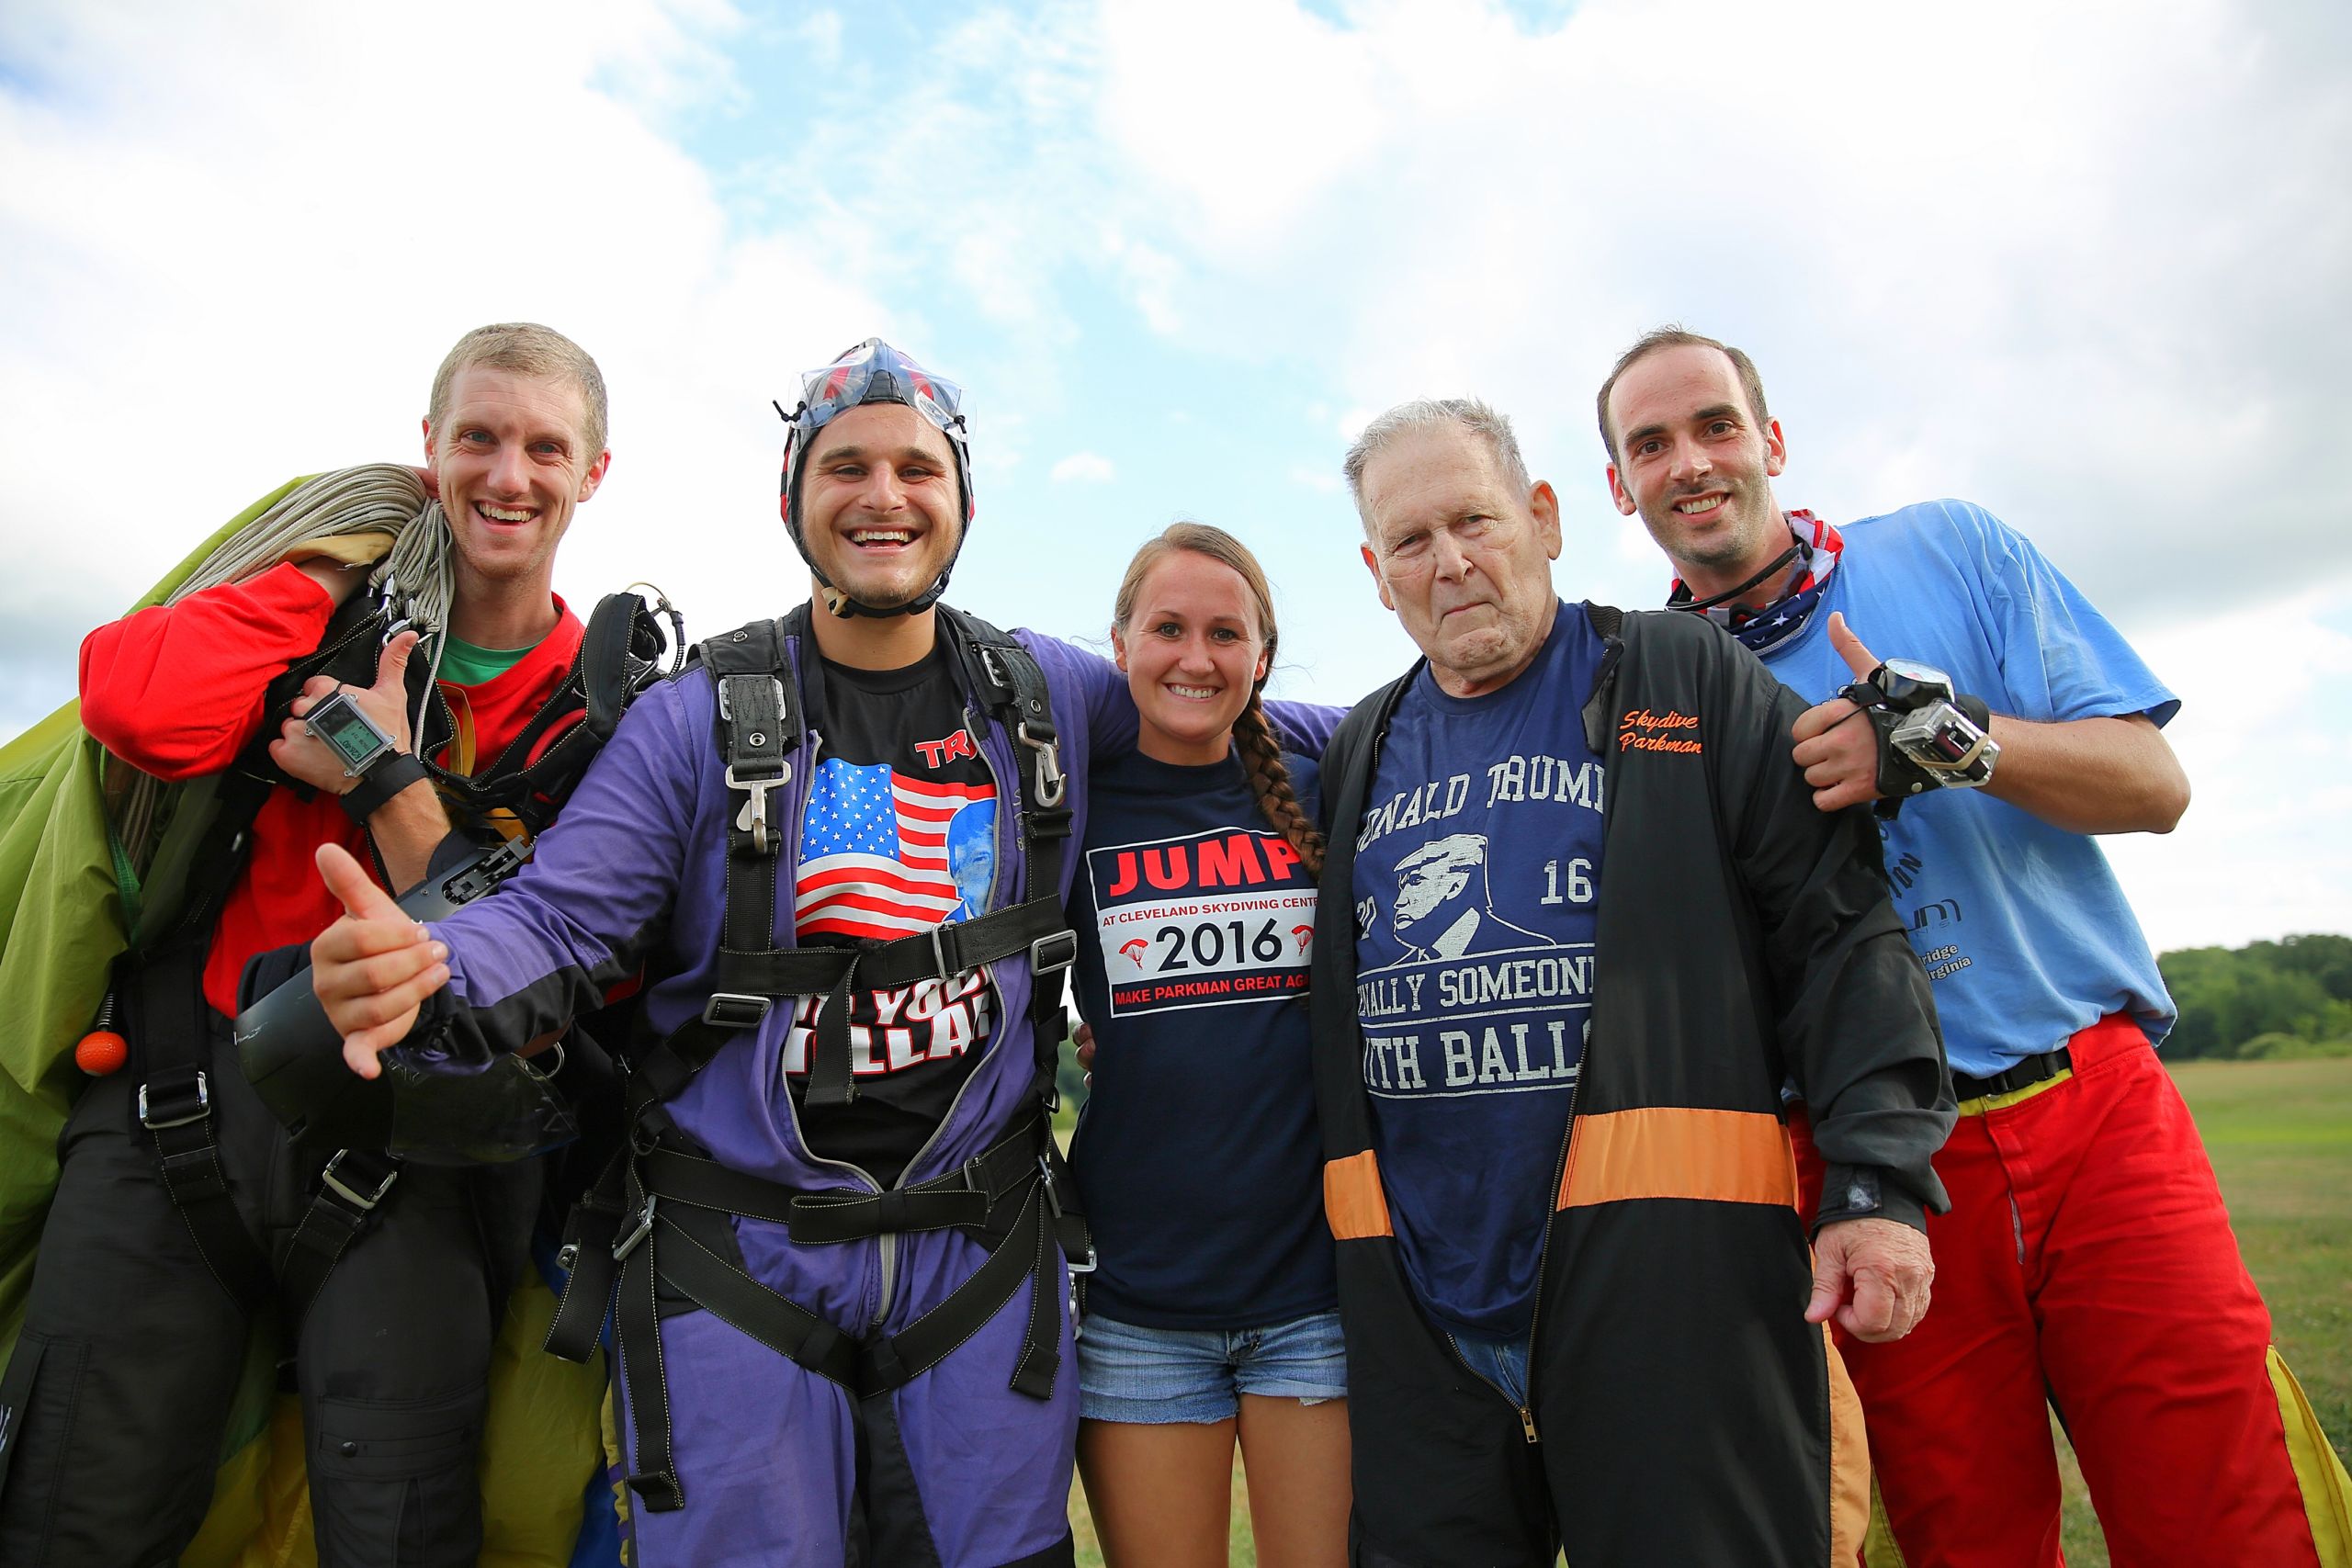 Mason Muldoon, second from left, and his grandfather Joe, second from right, with their jump instructors after completing skydiving jumps Saturday. (CJ photo by Don Carrington)